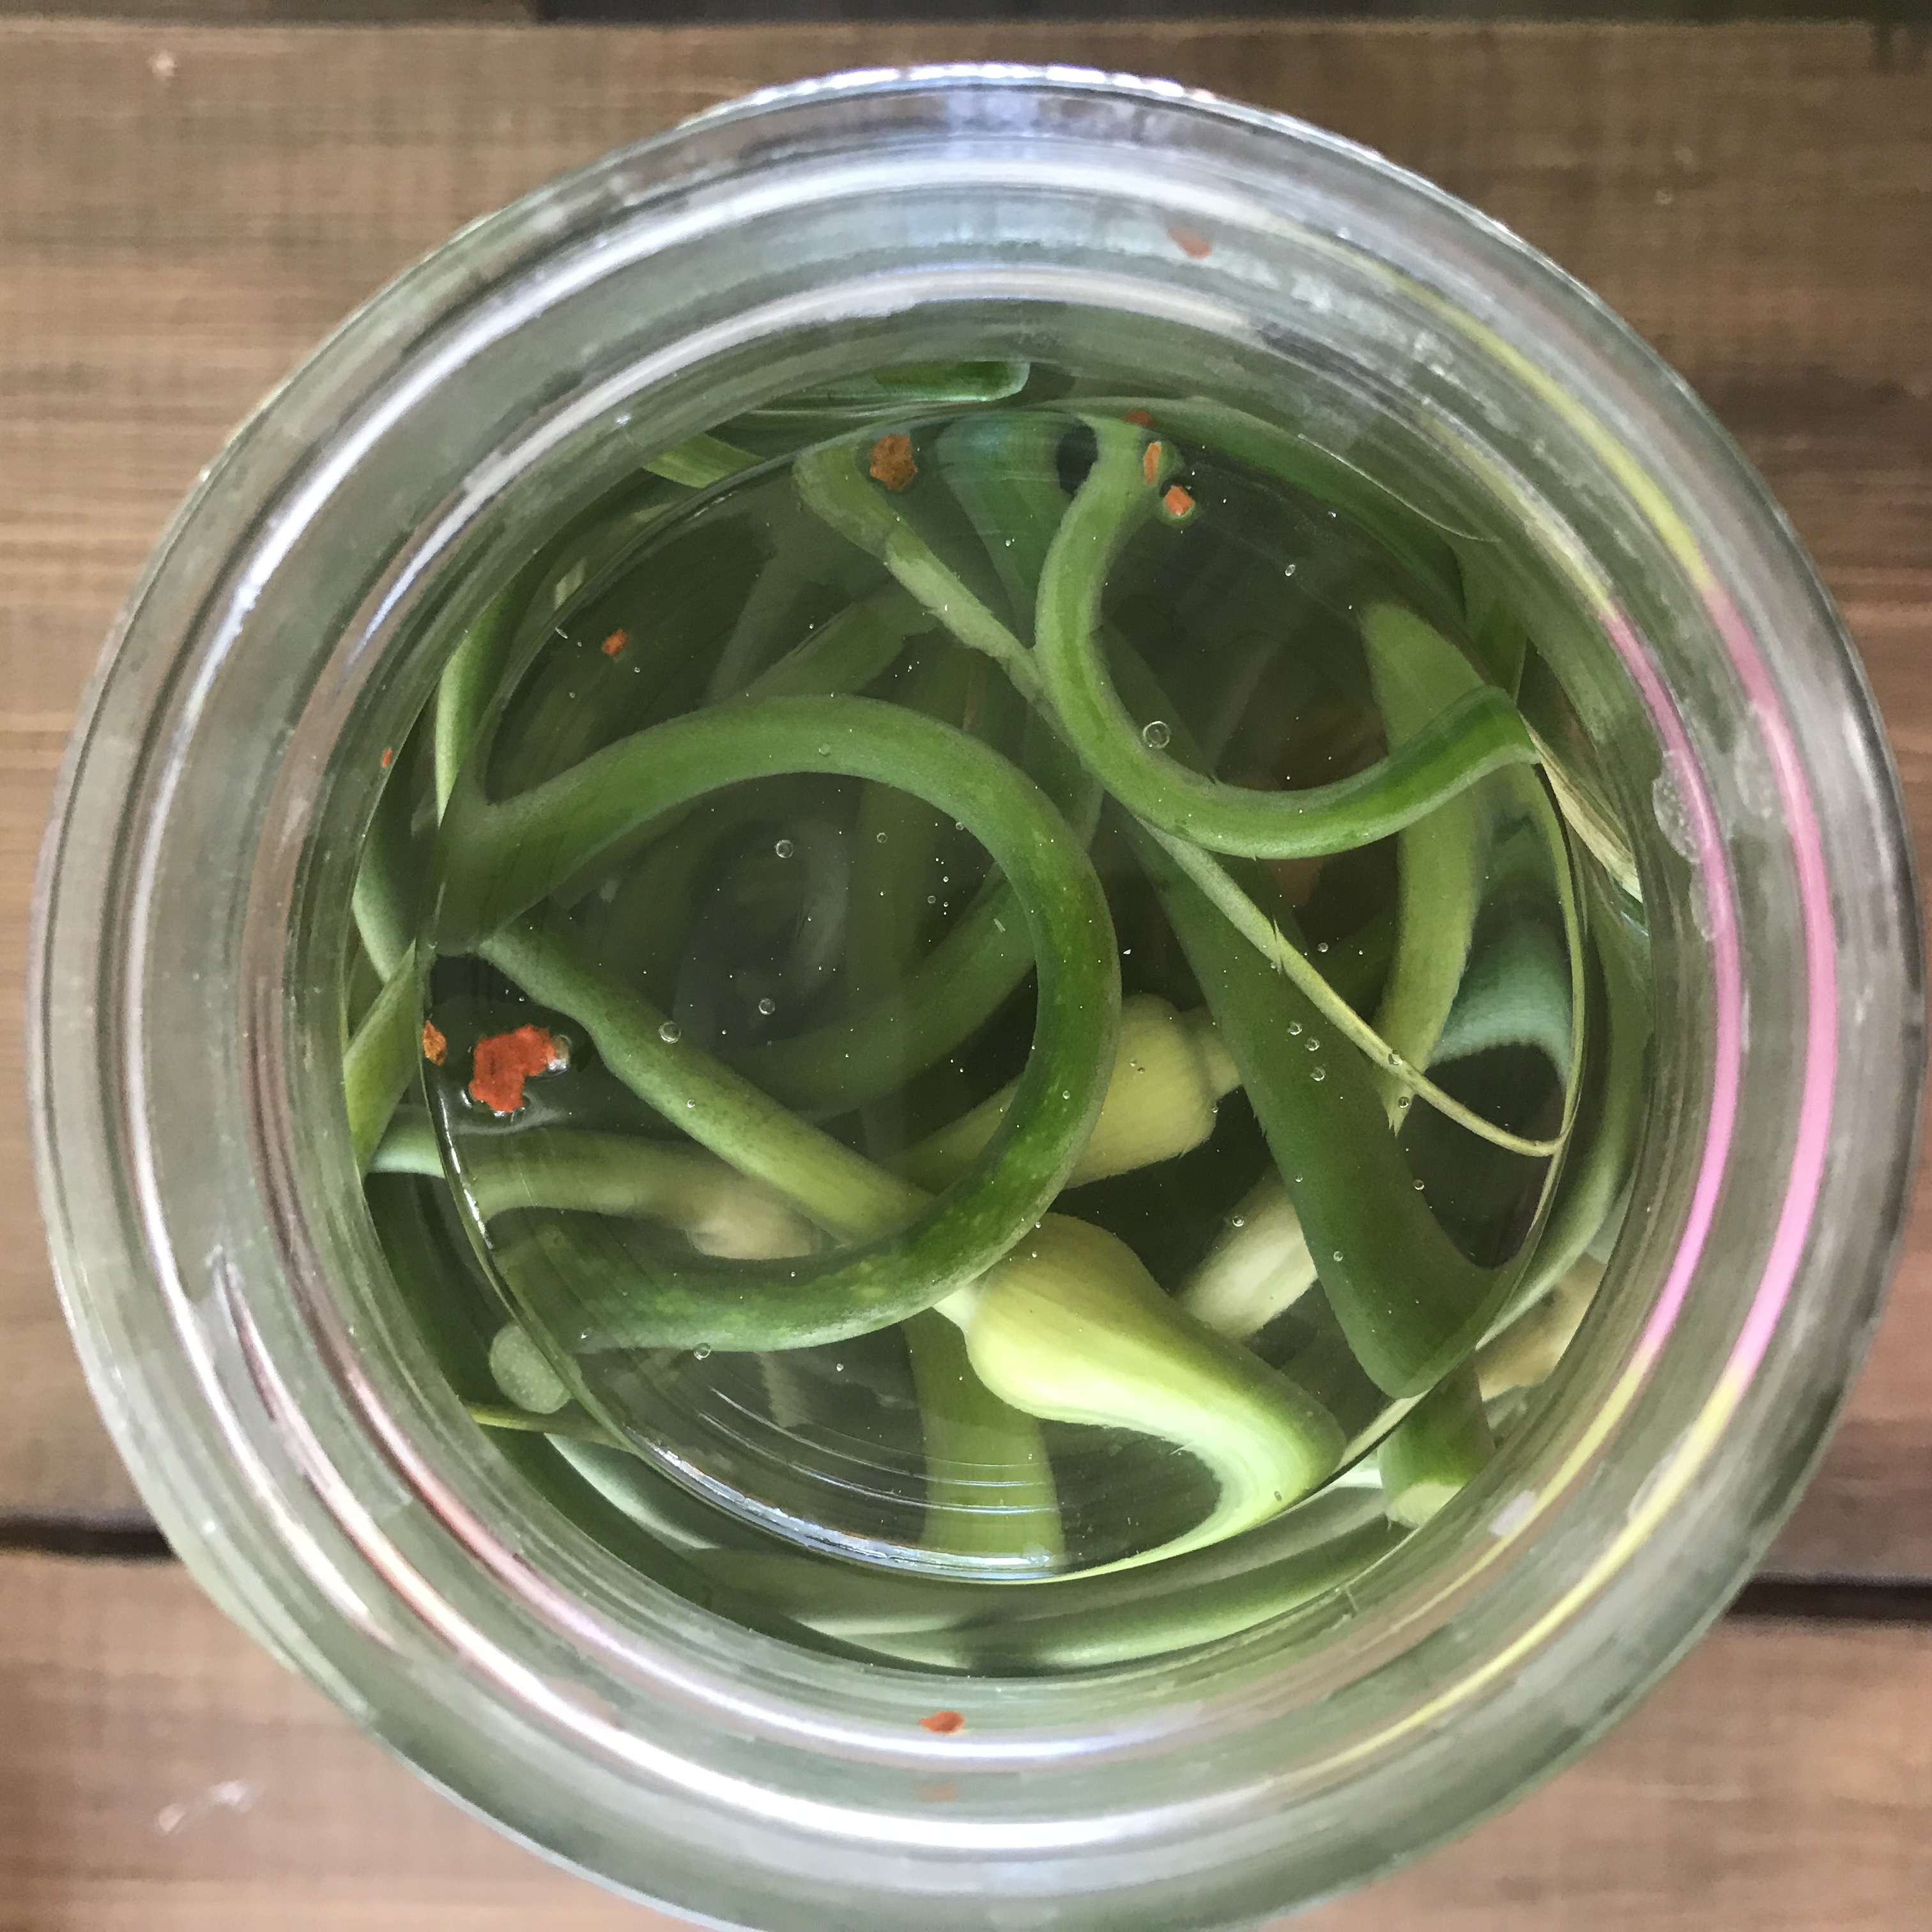 Lacto fermented Garlic Scapes